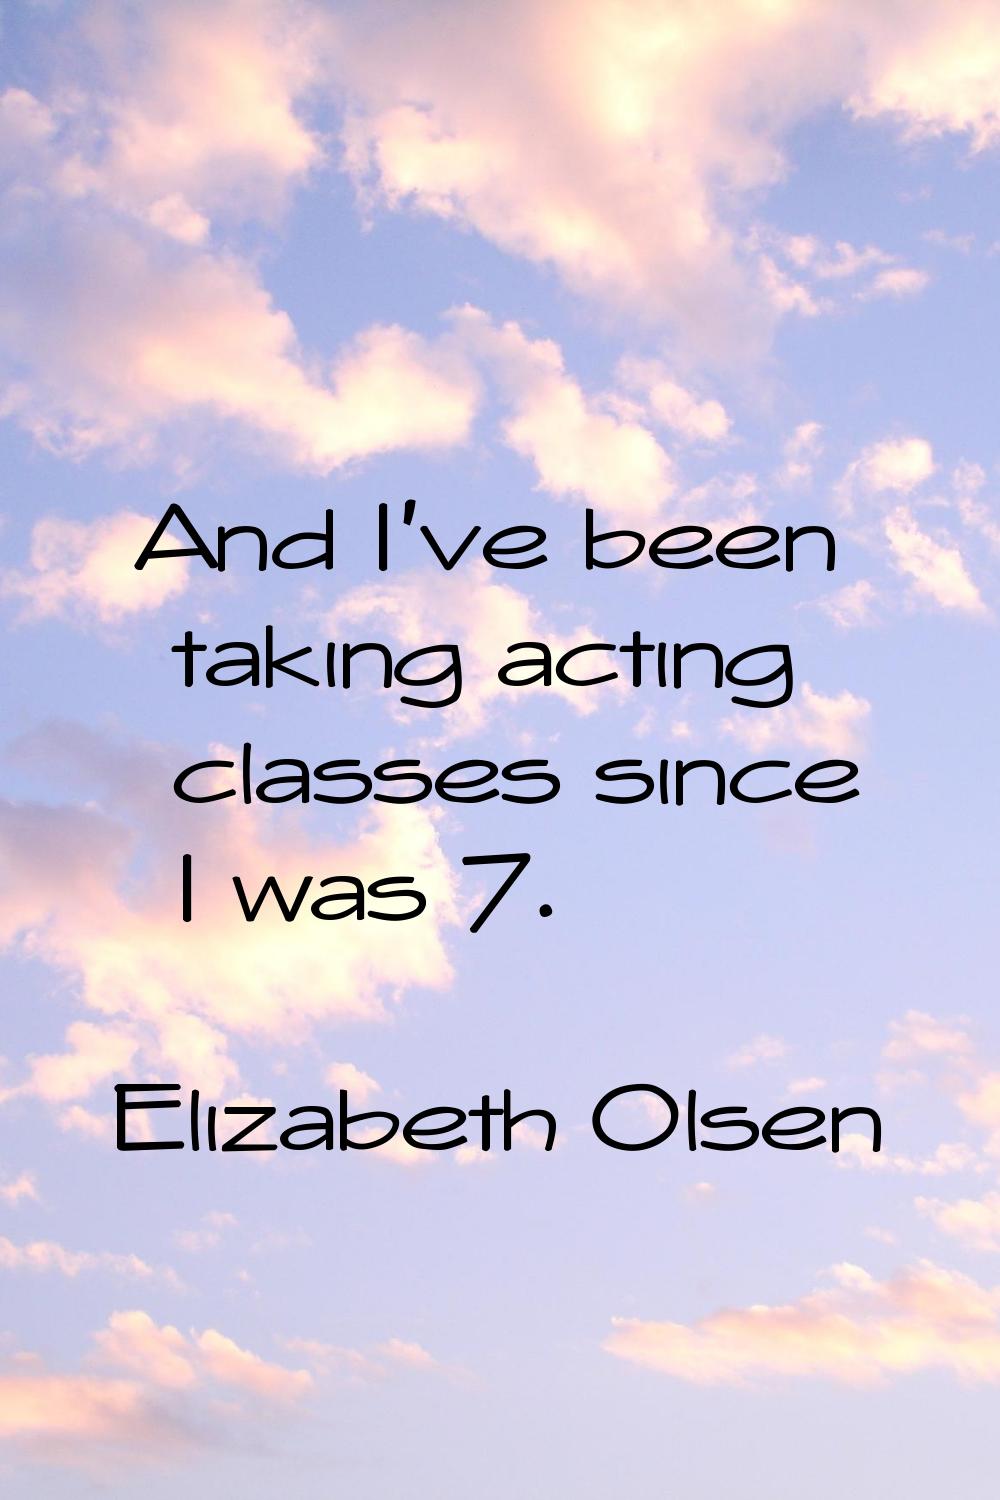 And I've been taking acting classes since I was 7.